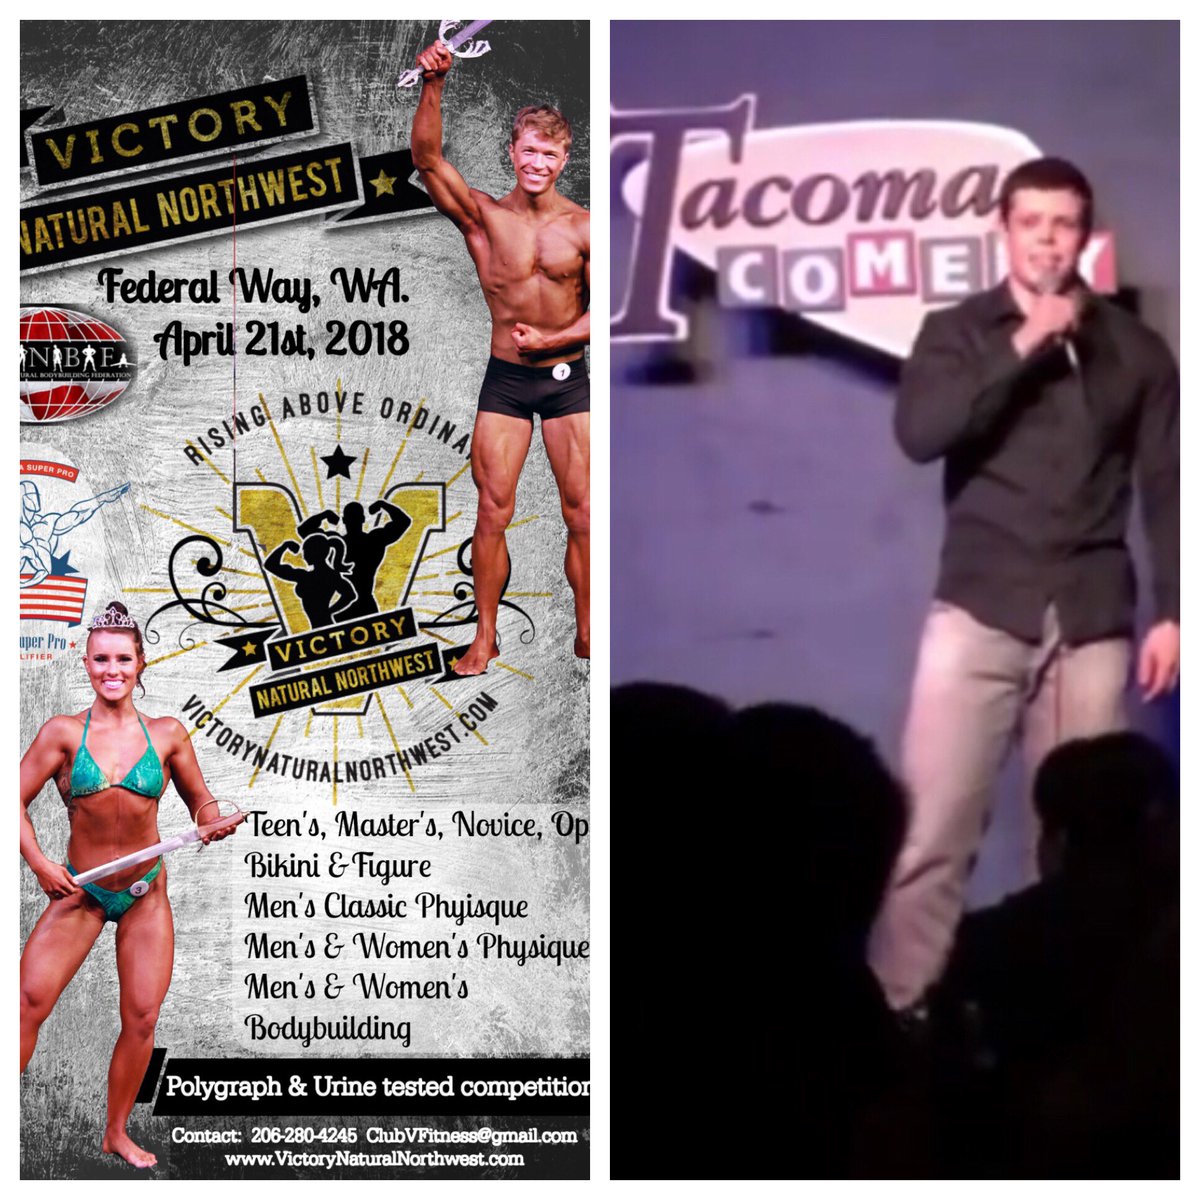 Performing a 10-minute featured comedy act this Saturday! victorynaturalnorthwest.com #classicphysique #bodybuilding  #allkindsofgains #gainz #staynatty #nattylife #nattyrevolution #aesthetics #naturalaesthetics #aestheticlifestyle #comedy #standupcomedy #comedian #motivationmonday